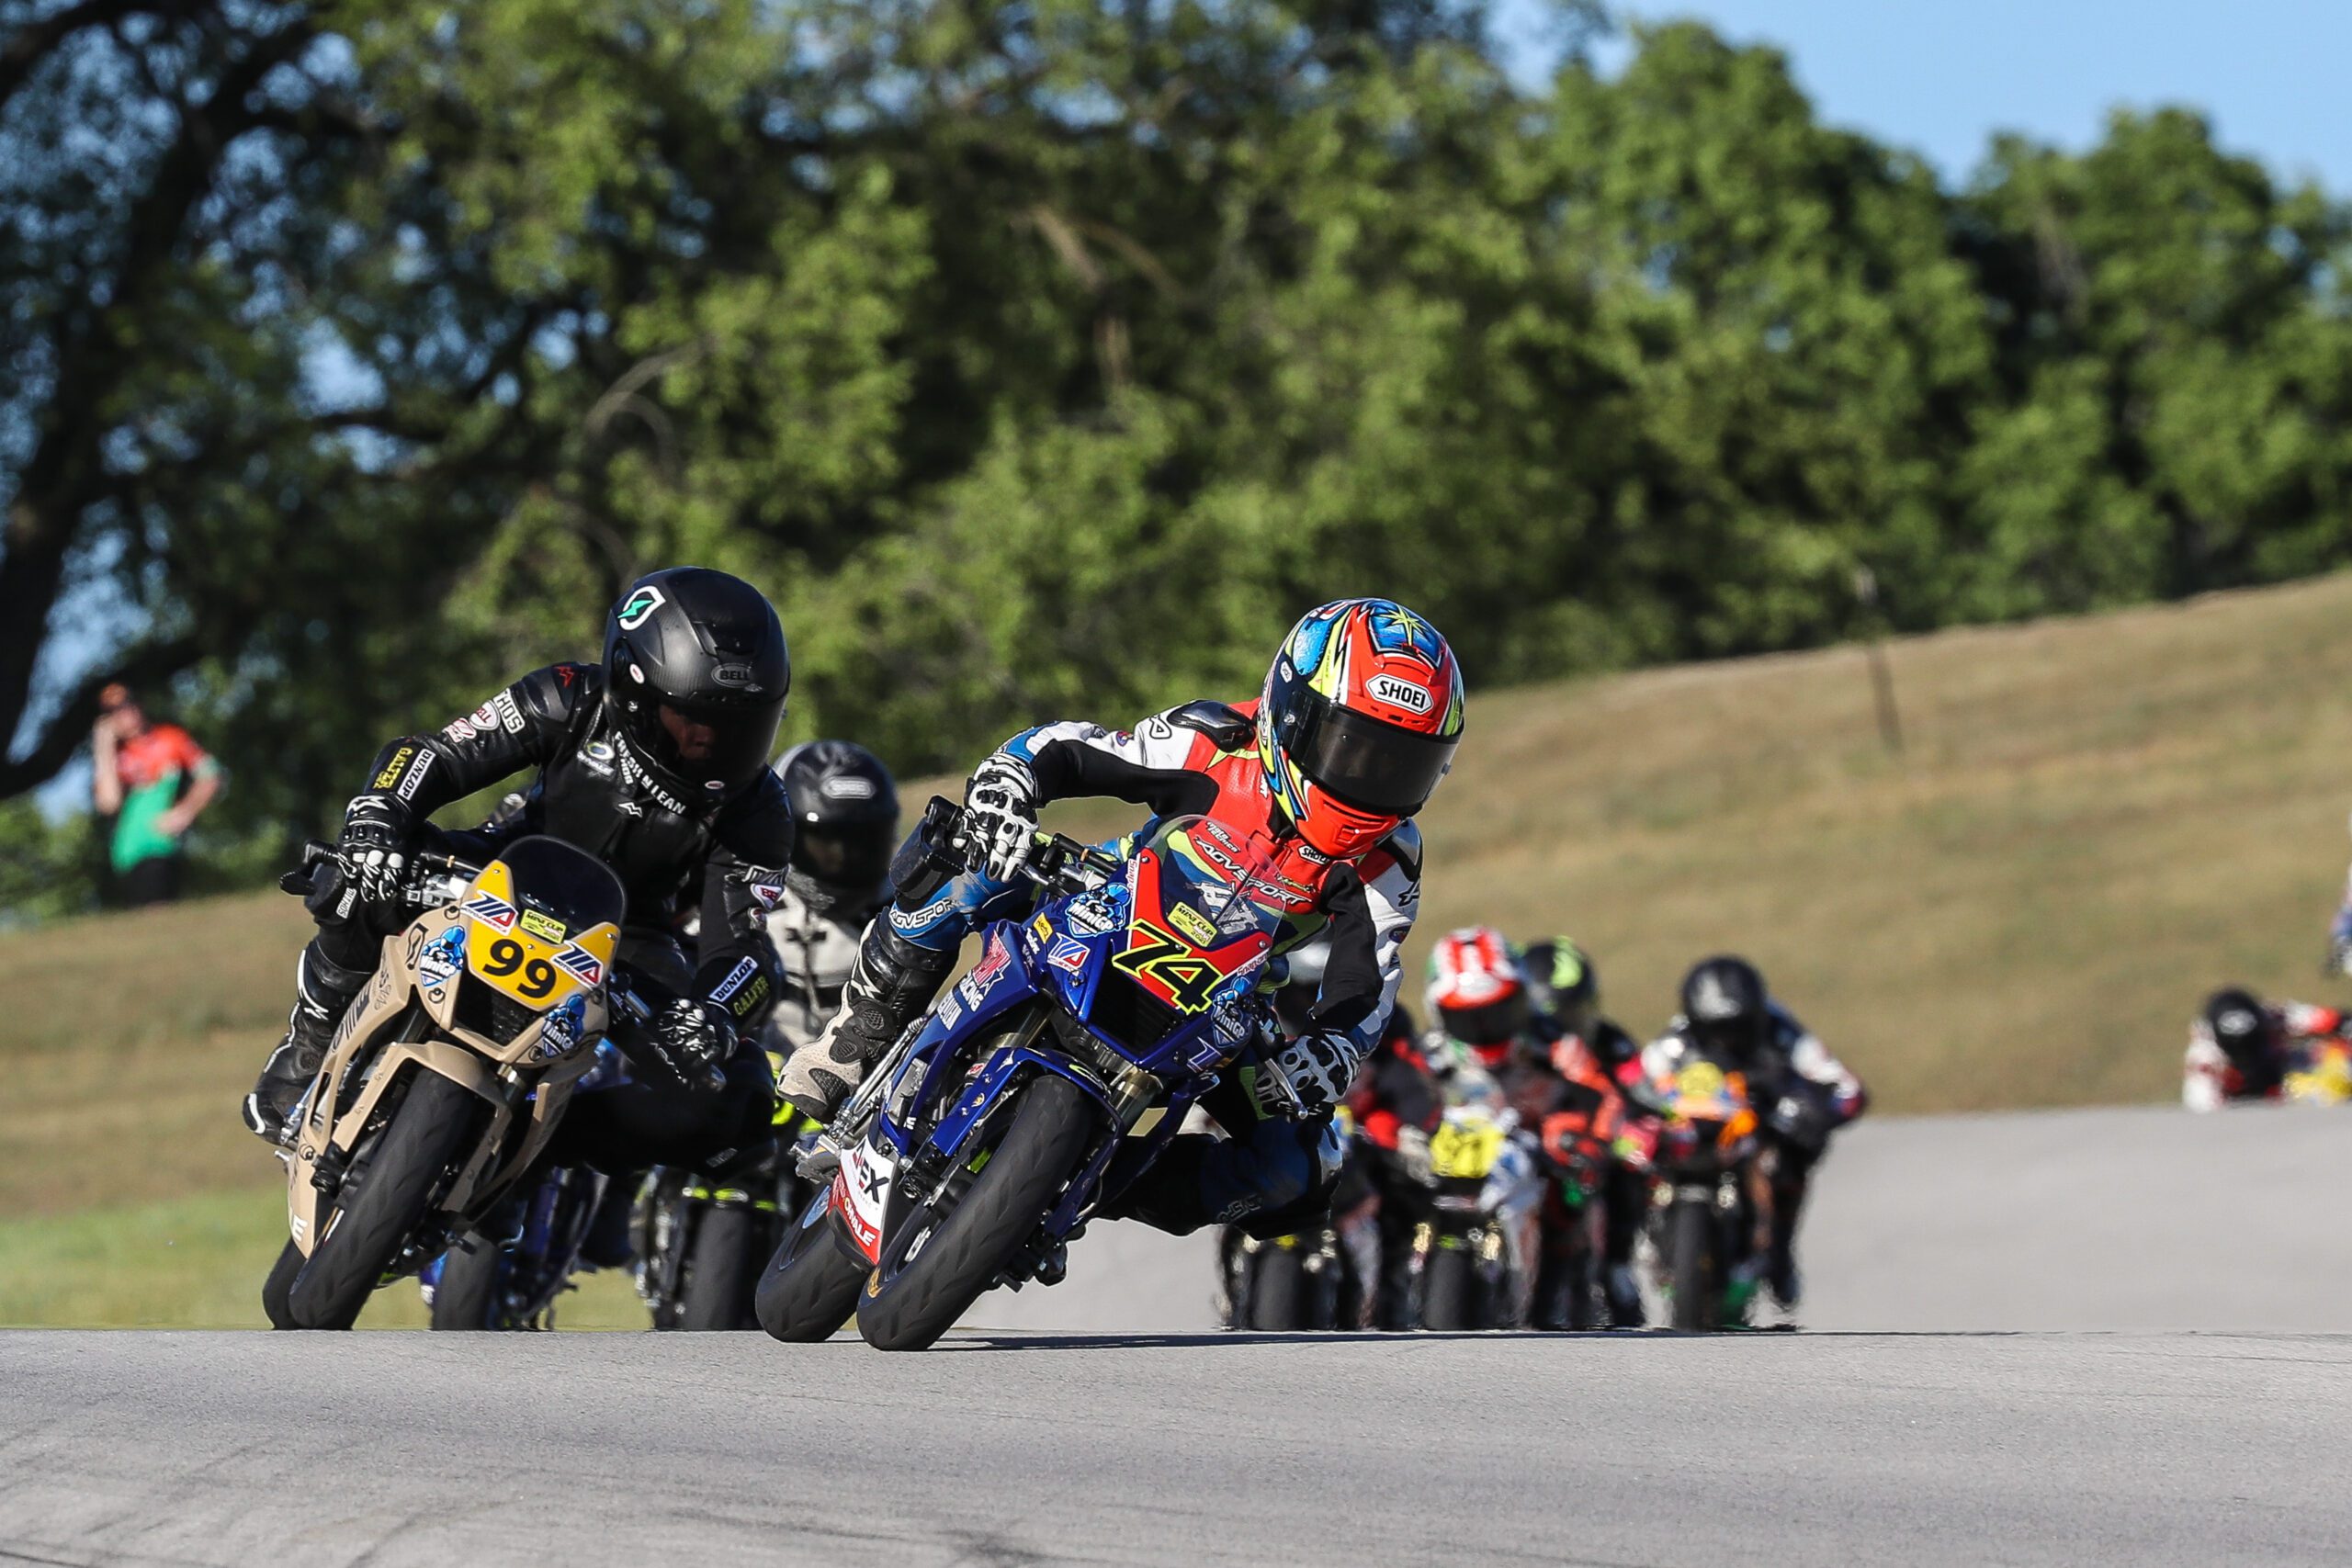 Mission Mini Cup By Motul Racers Can Now Qualify For MiniGP World Finals In  Two Classes - MotoAmerica